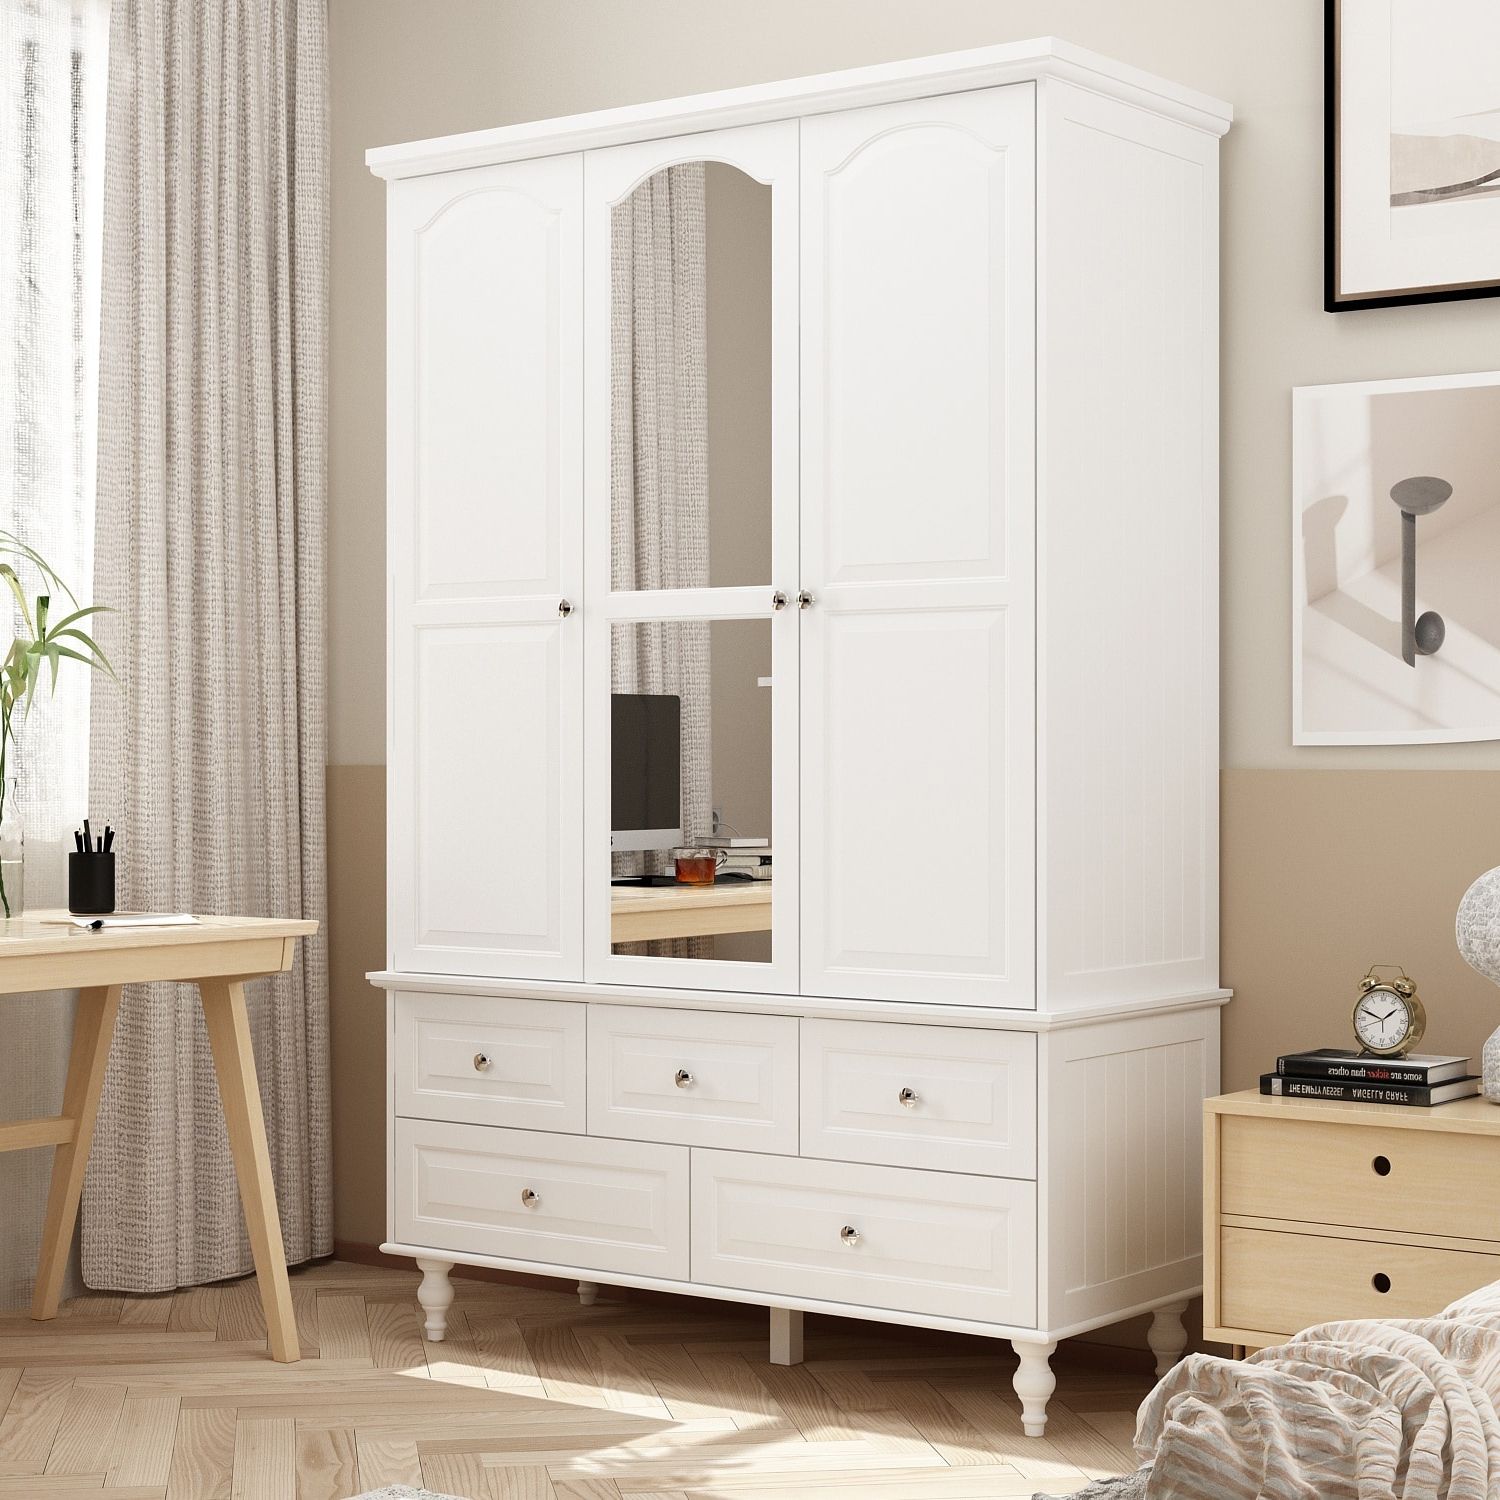 70.9"h White Lacquered Armoires Wardrobes With Mirror Doors – Bed Bath &  Beyond – 36679383 Pertaining To White 3 Door Wardrobes With Mirror (Gallery 9 of 20)